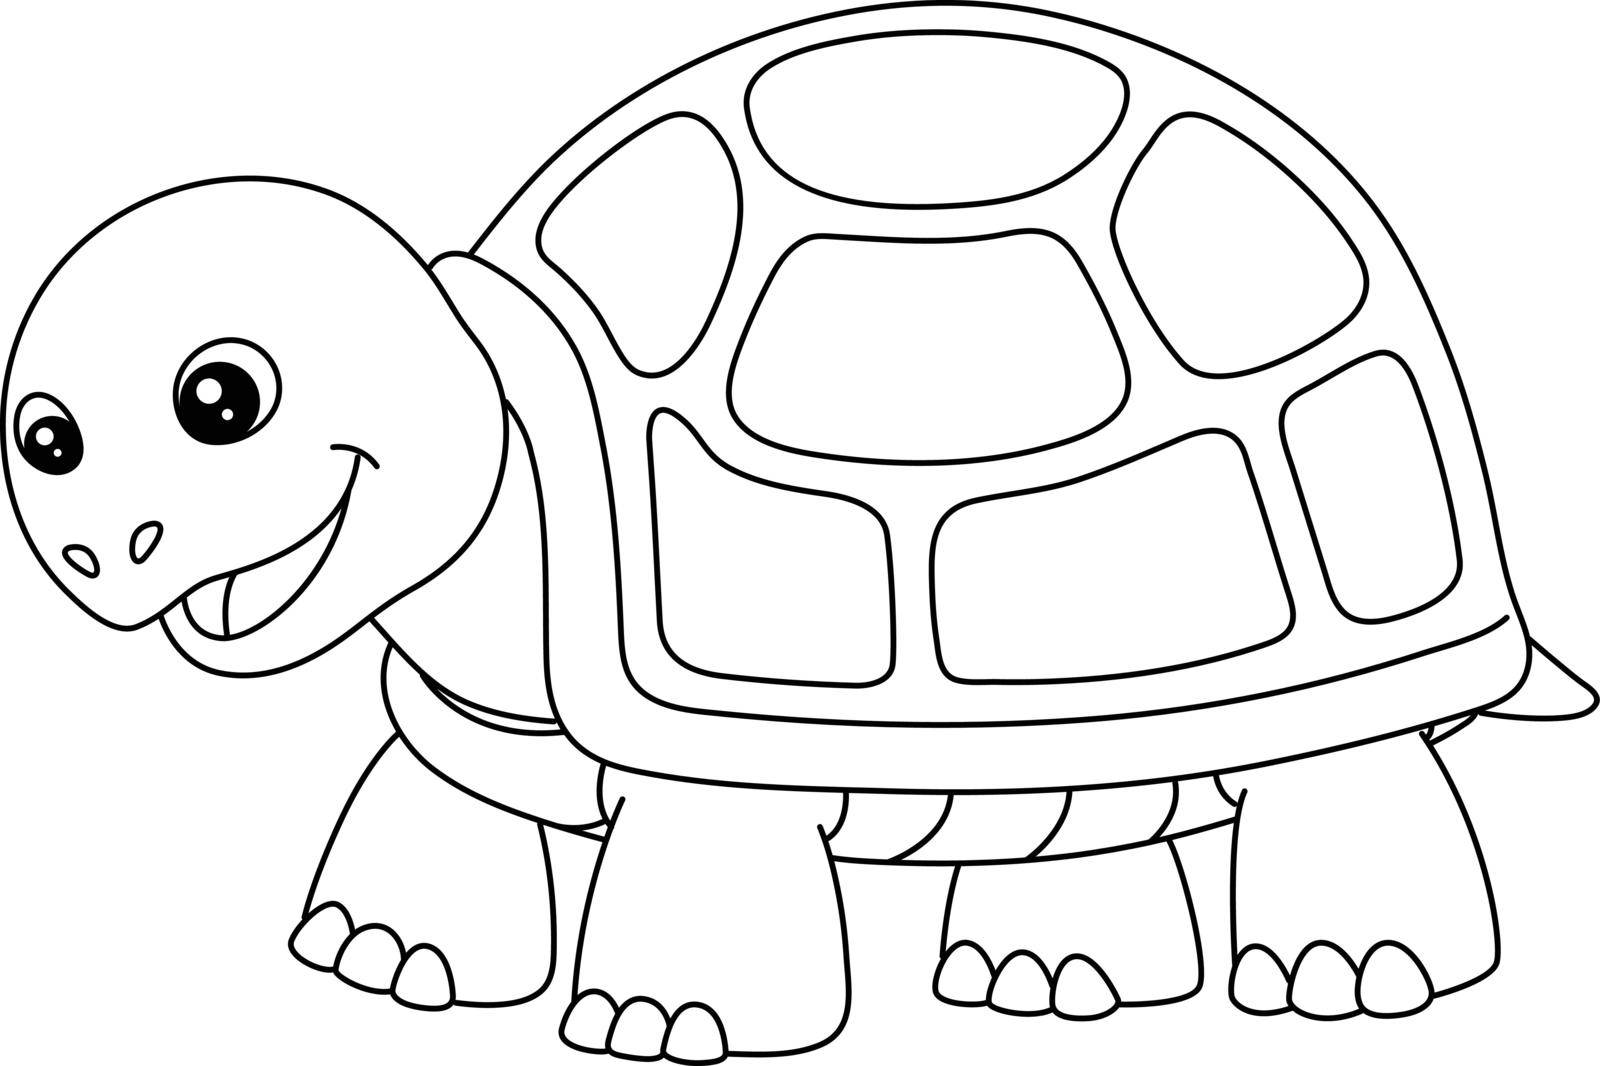 A cute and funny coloring page of a turtle. Provides hours of coloring fun for children. To color, this page is very easy. Suitable for little kids and toddlers.